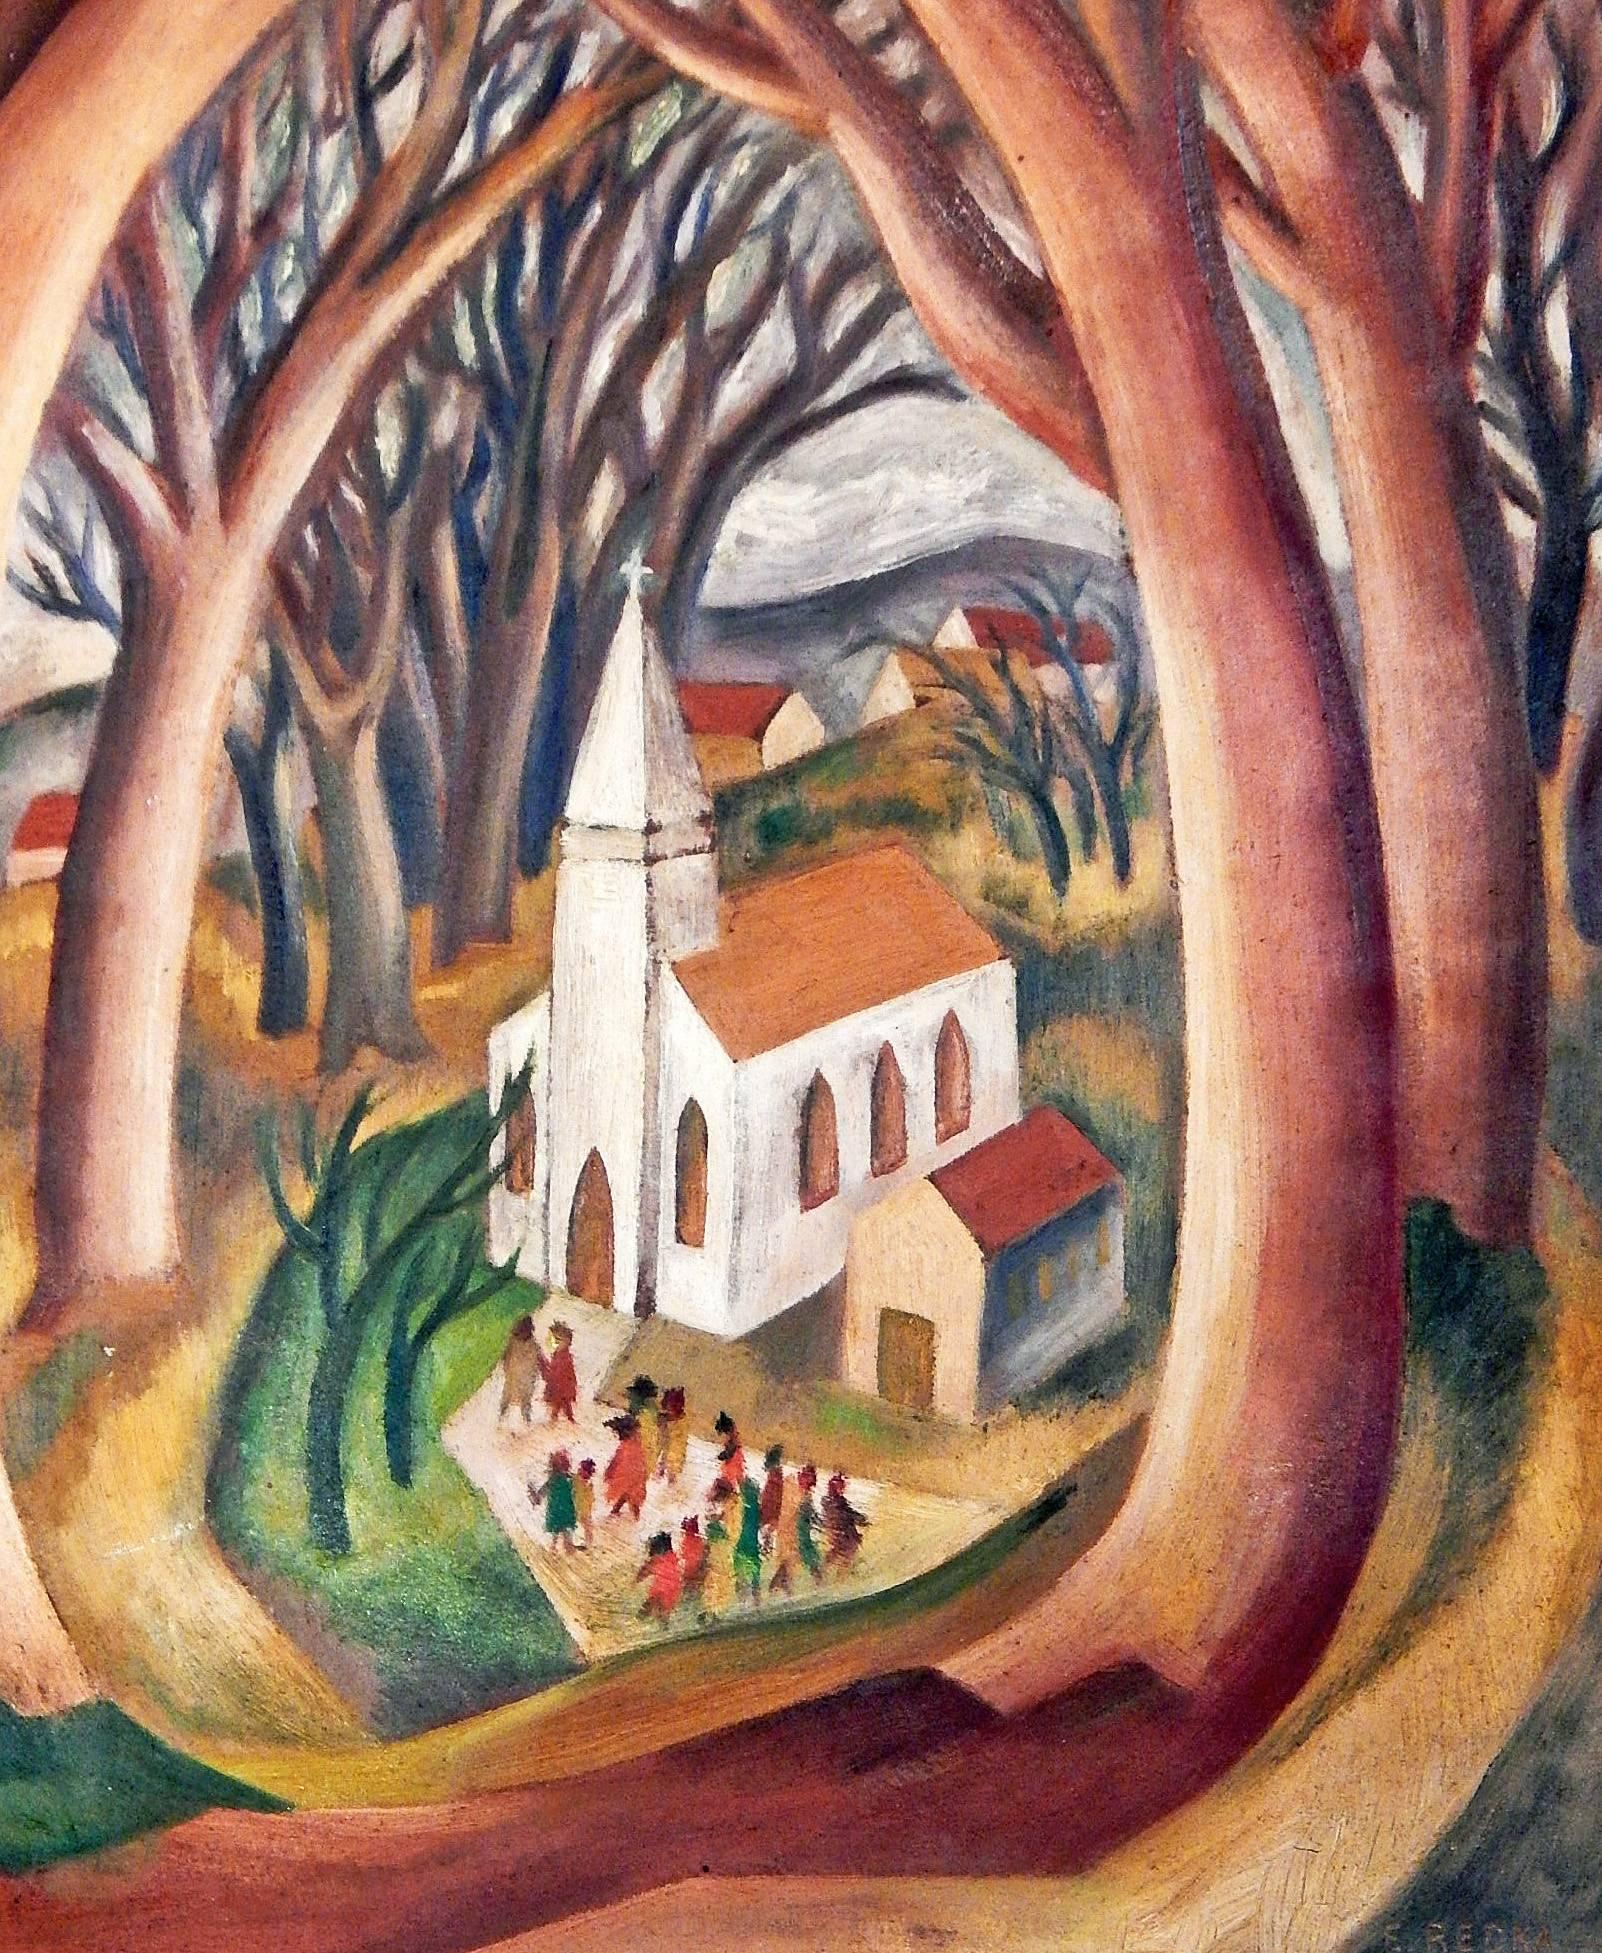 Although it shares a name with Grant Wood's iconic painting, the subject of Eugenia Redka's painting here is much different, a charming white painted Gothic church in the middle of the Vermont woods. The surrounding trees make a protective embrace